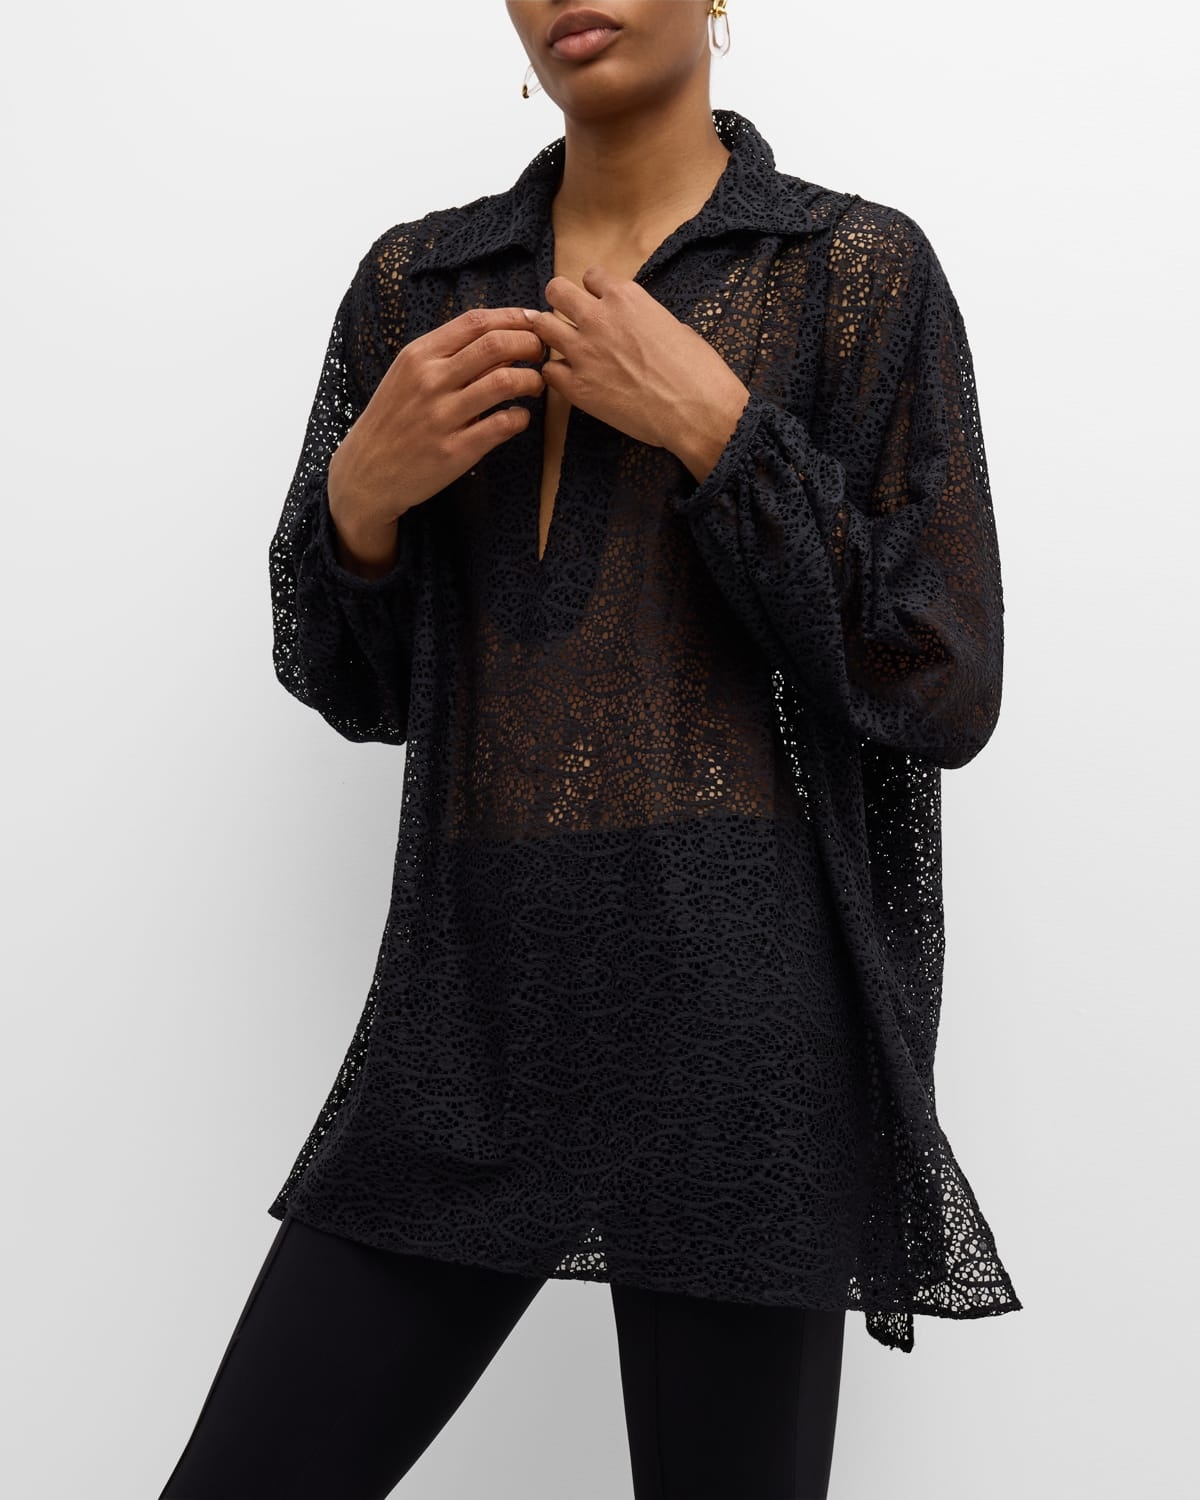 Nuancer Summer Long-Sleeve Collared Lace Blouse - 7